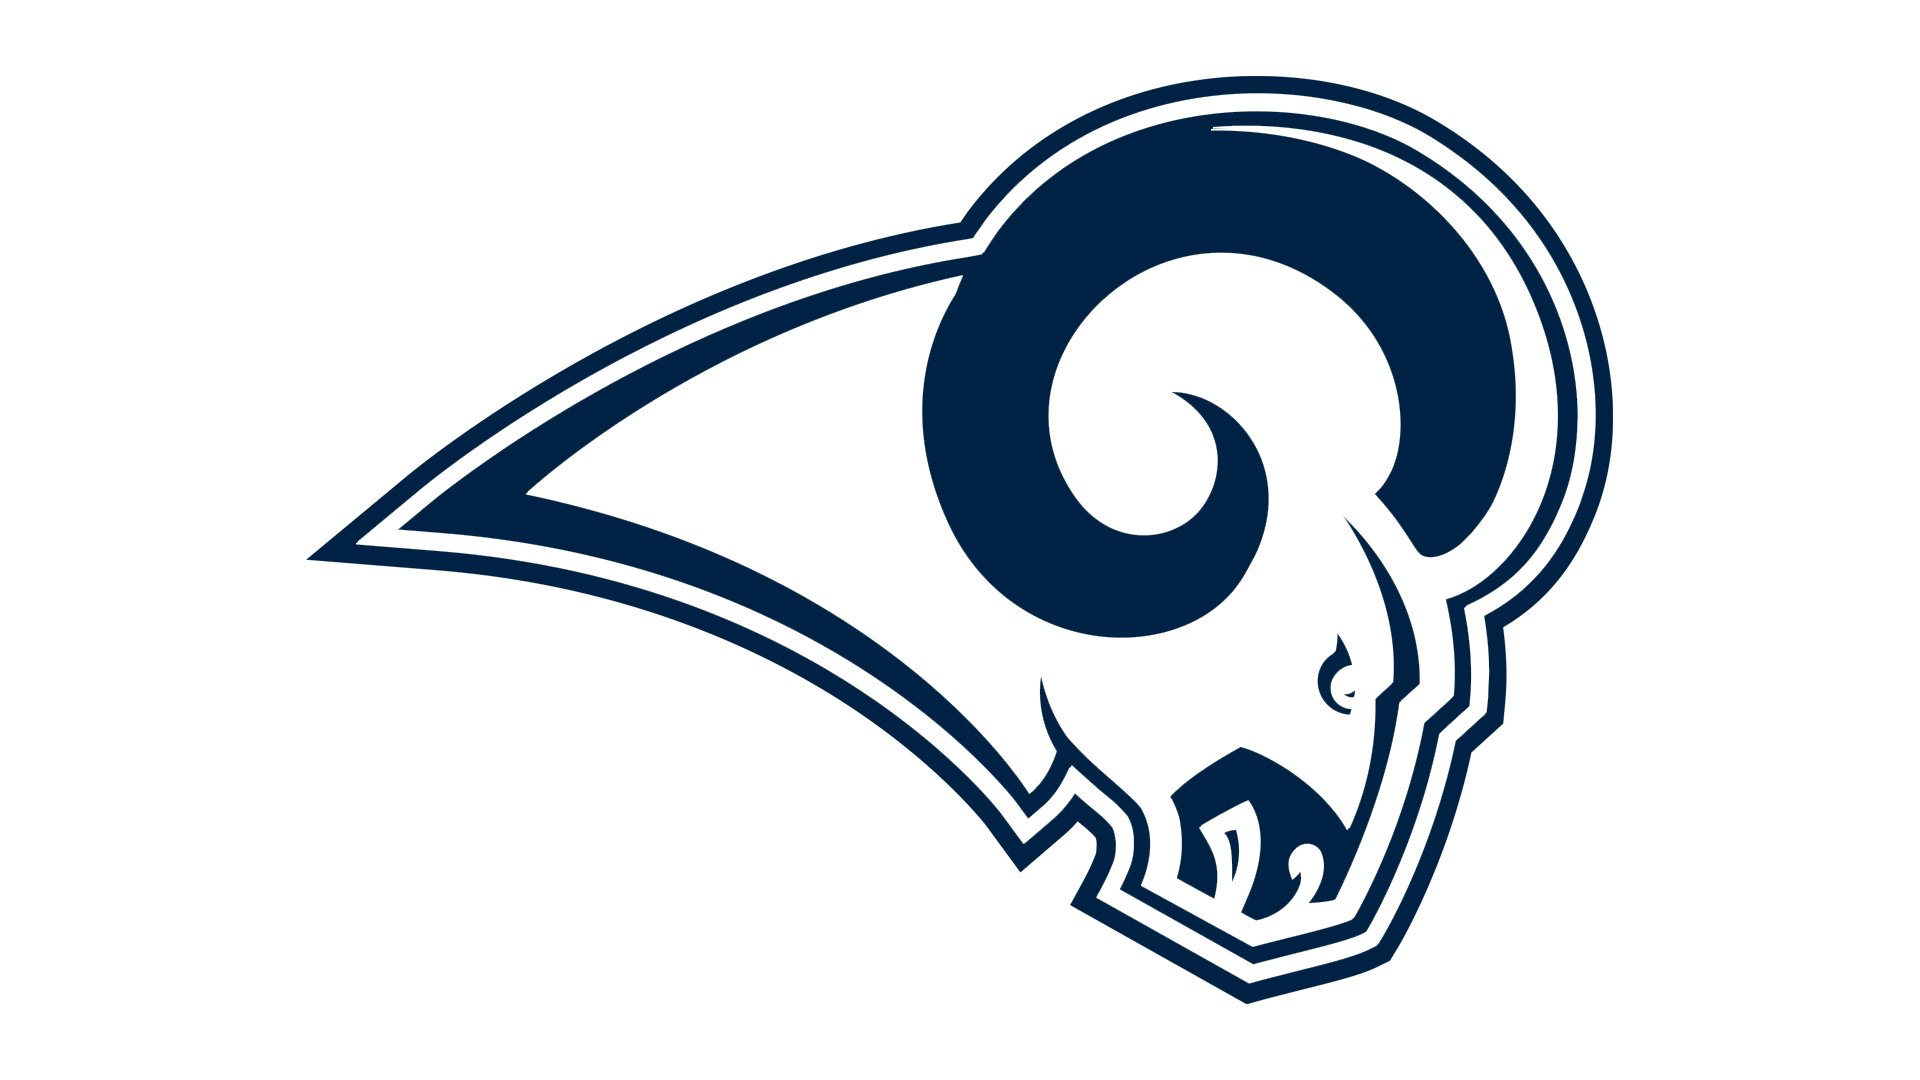 Meaning Los Angeles Rams logo and symbol | history and evolution1920 x 1080